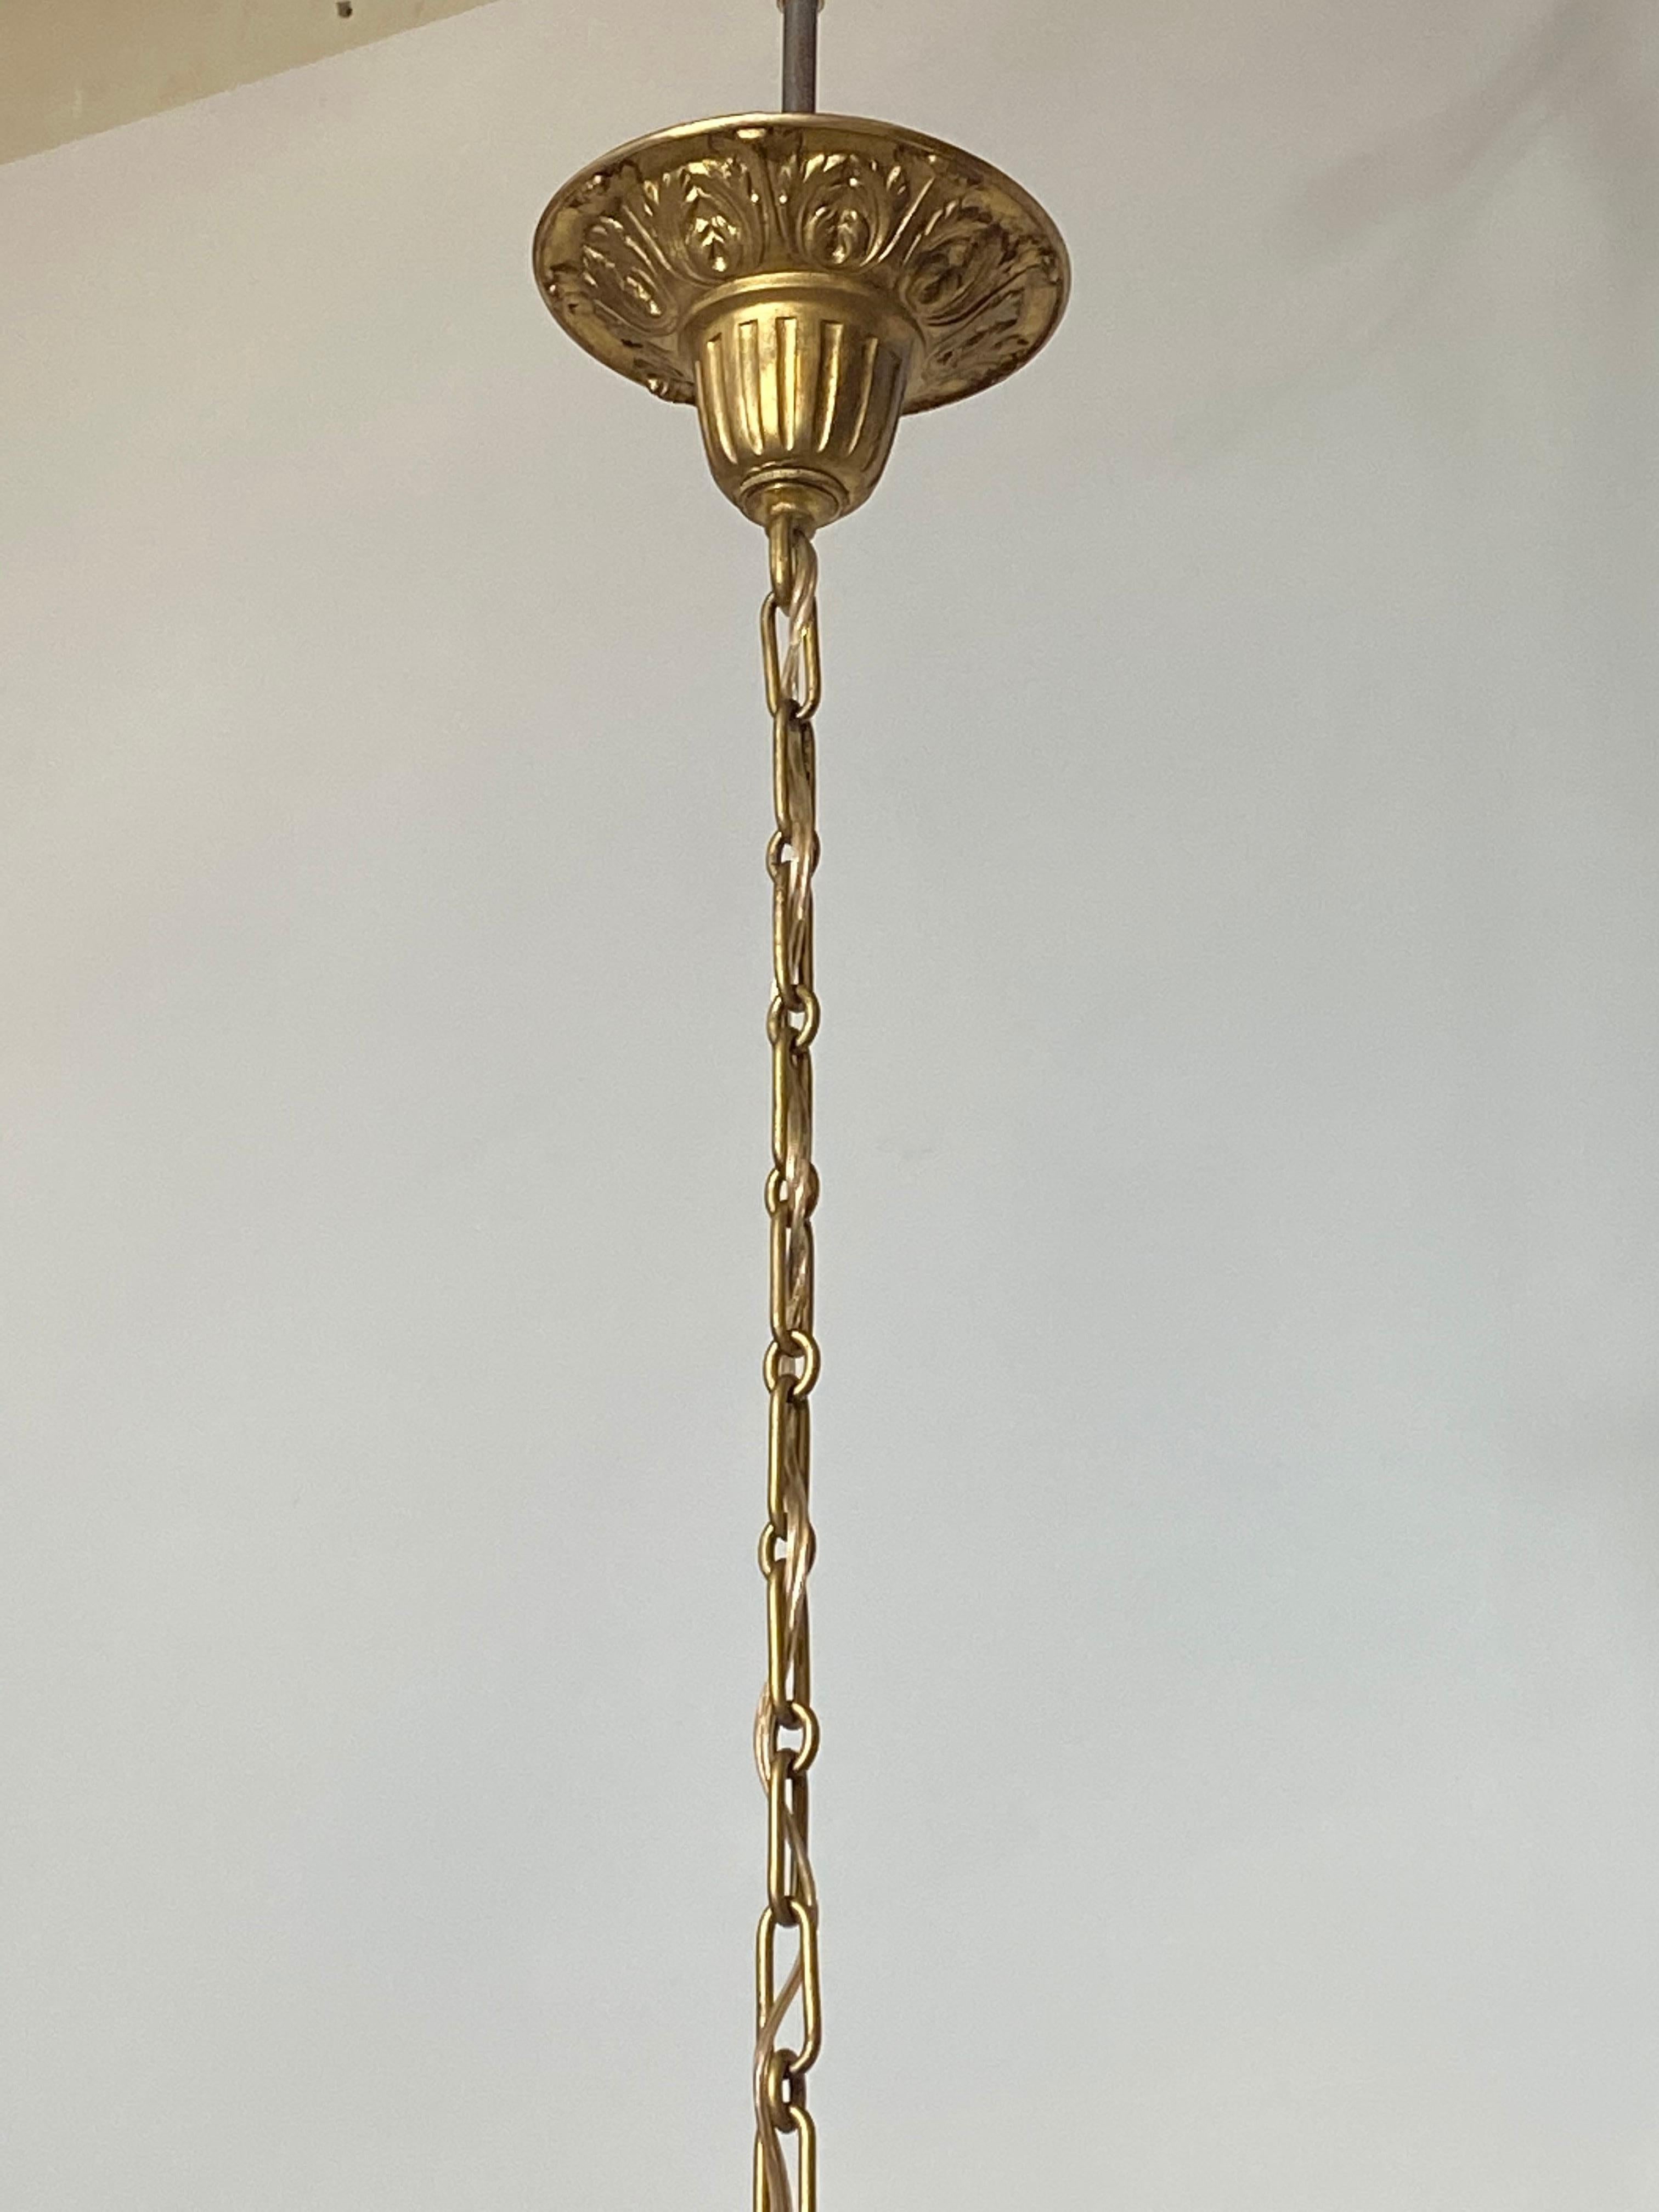 Baroque Late 19th-Early 20th Century Venetian Style Wood and Metal Hanging Lantern